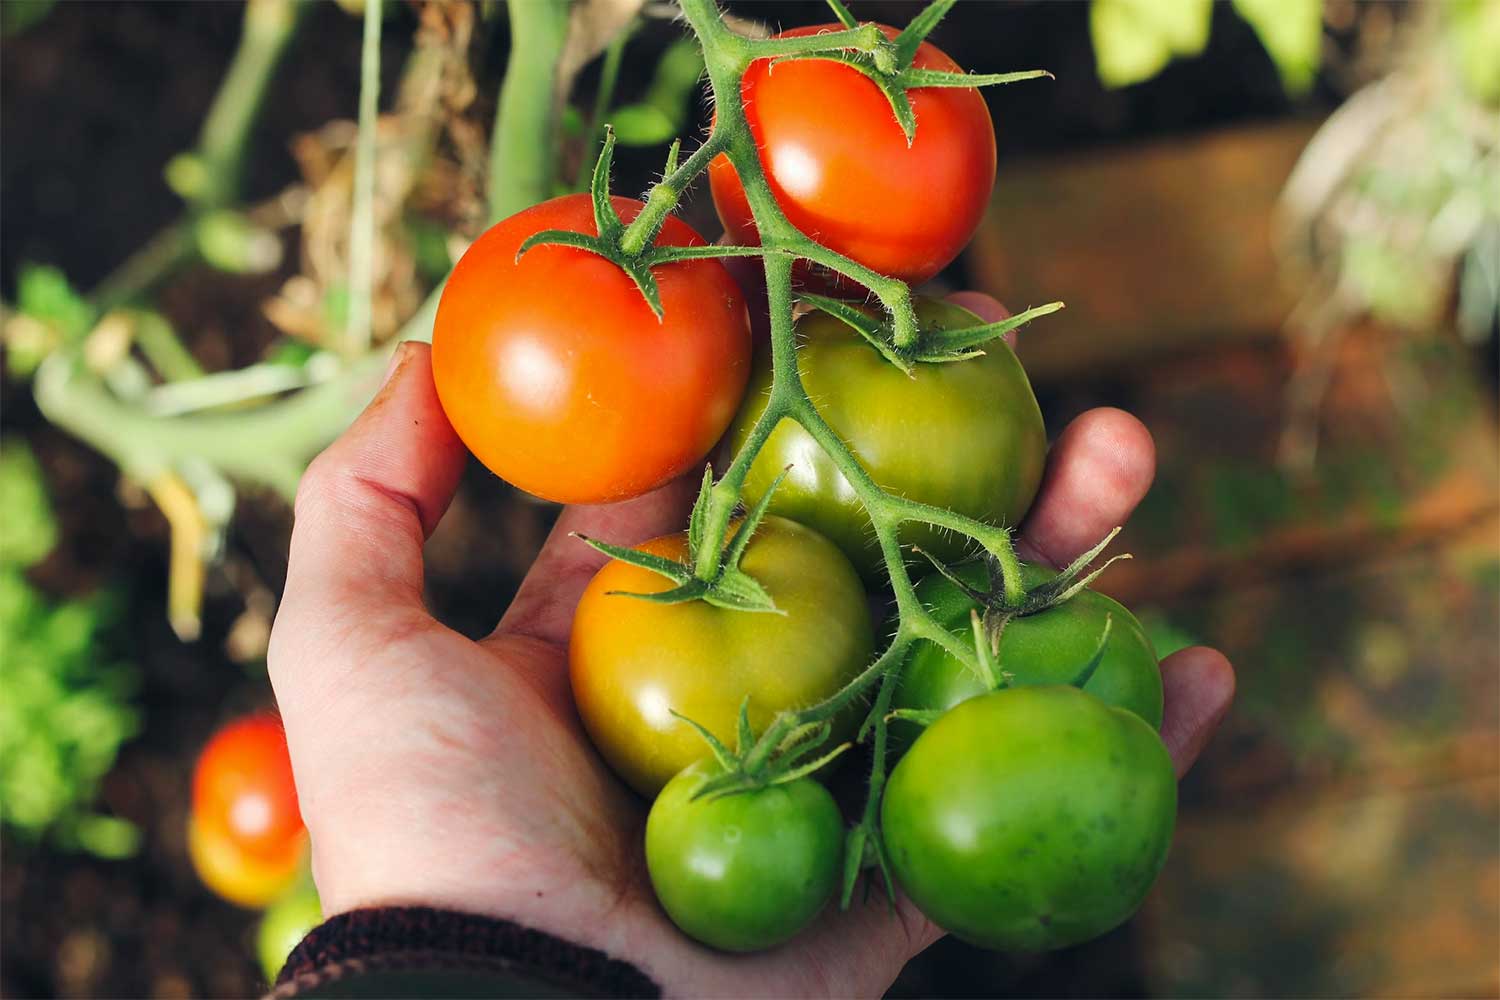 Featured image for “Here Today, Gone Tomato: Why You Should Take Advantage of Tomato Season”